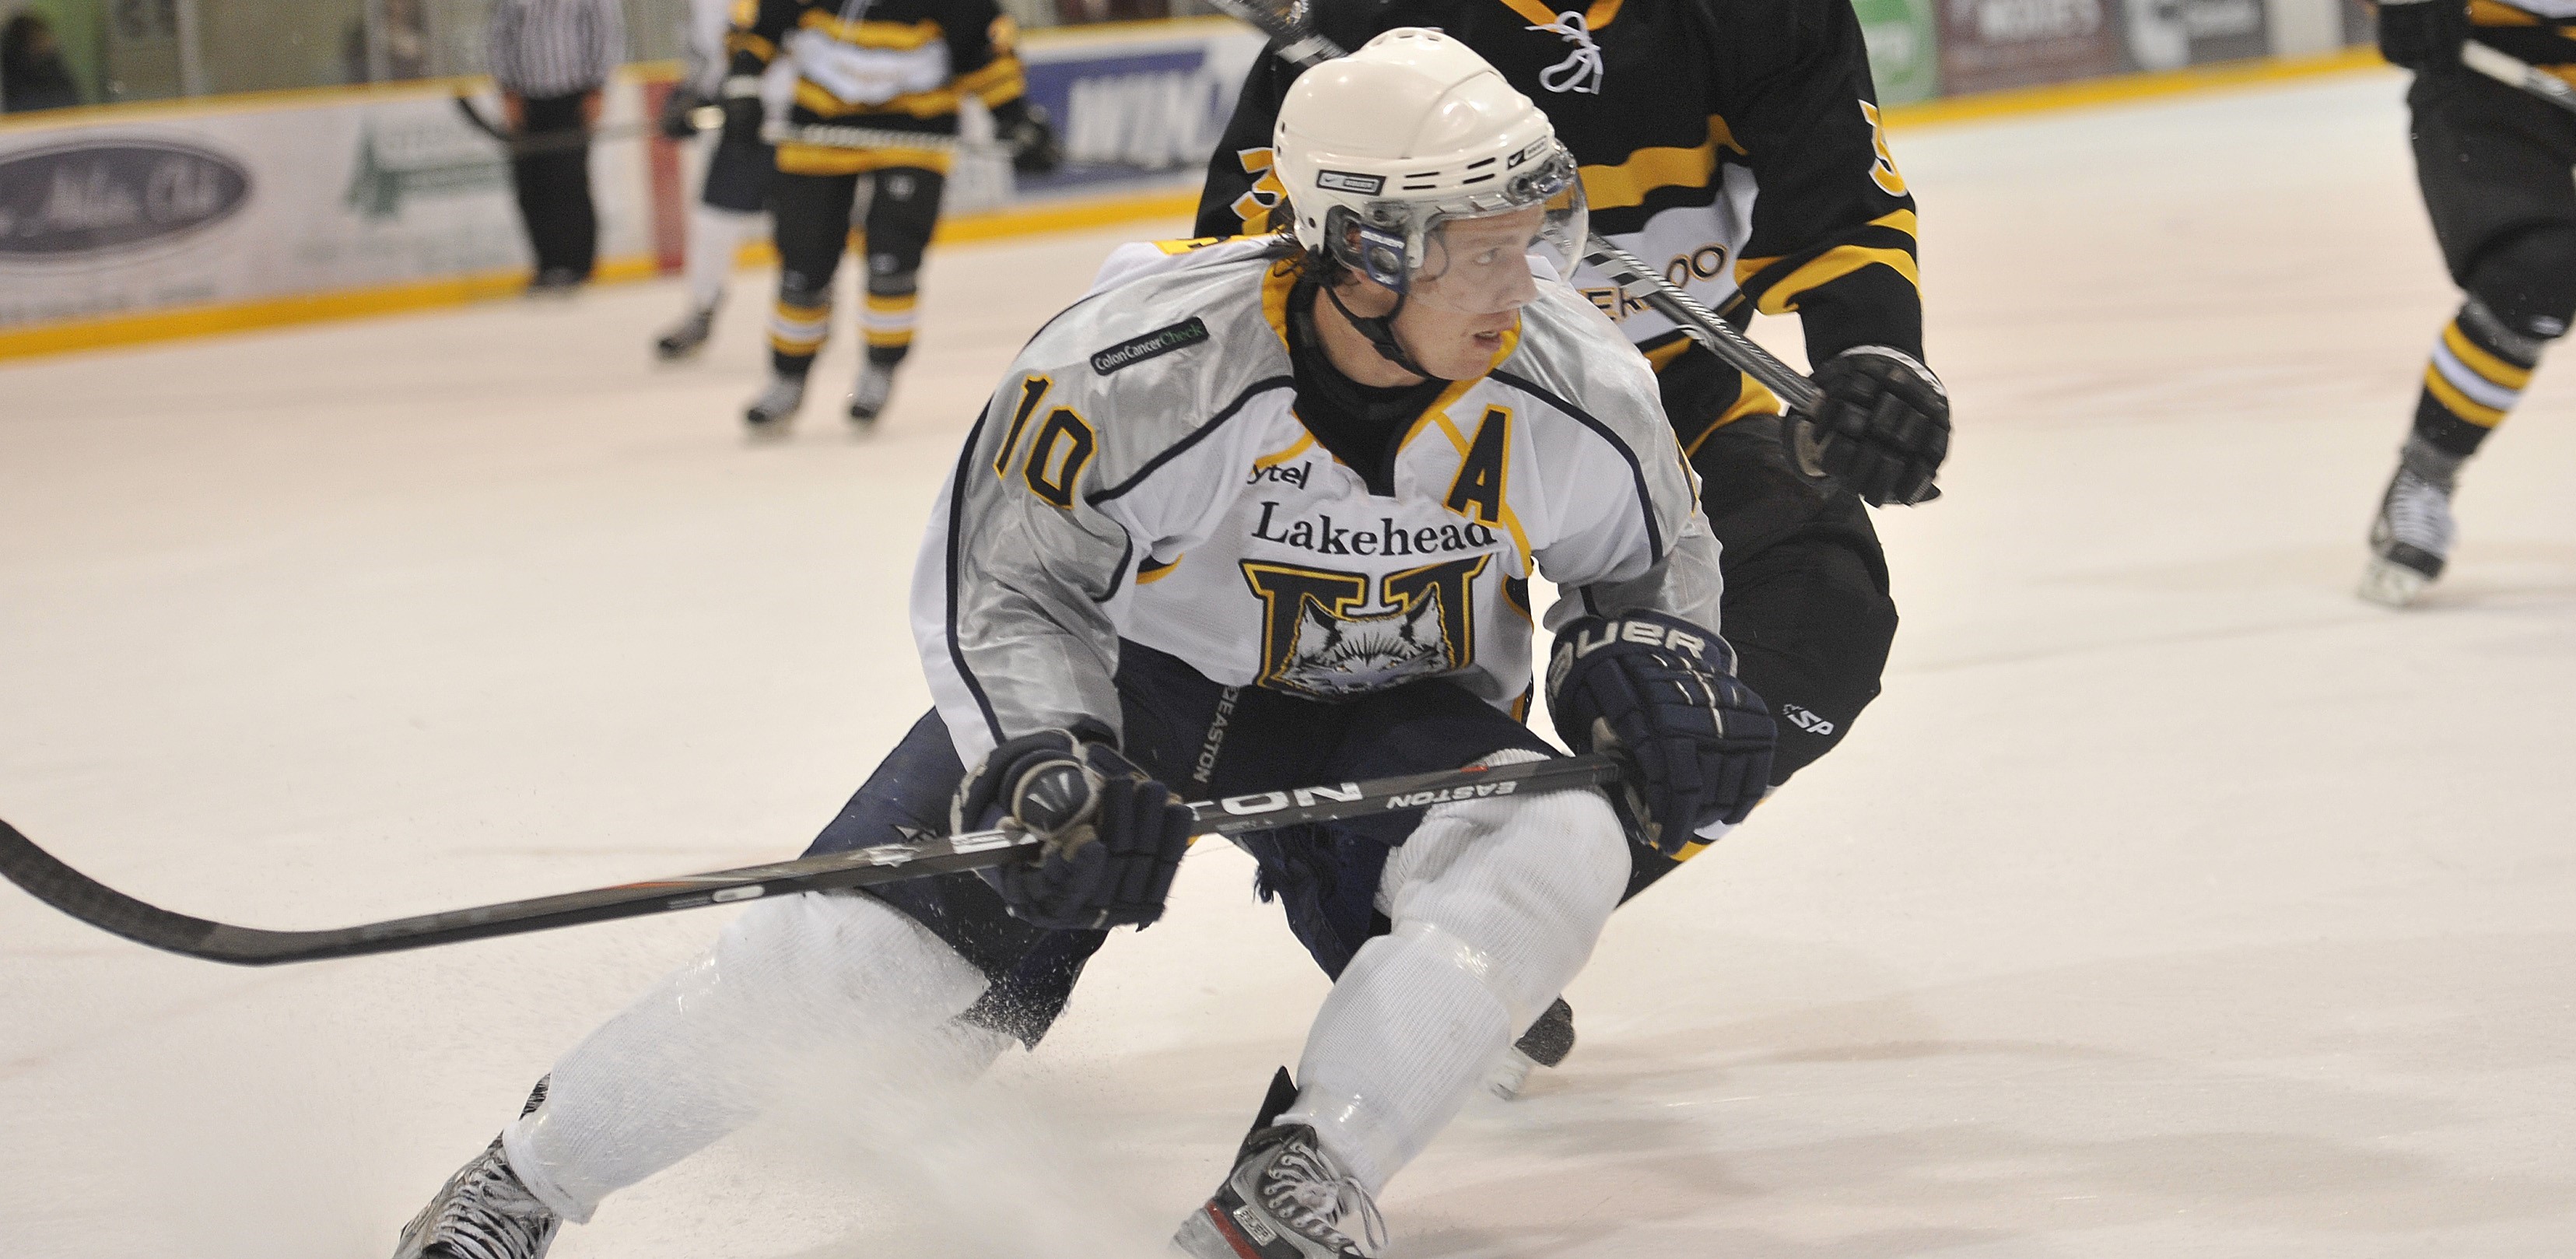 A Lakehead Thunderwolves men's hockey game in action